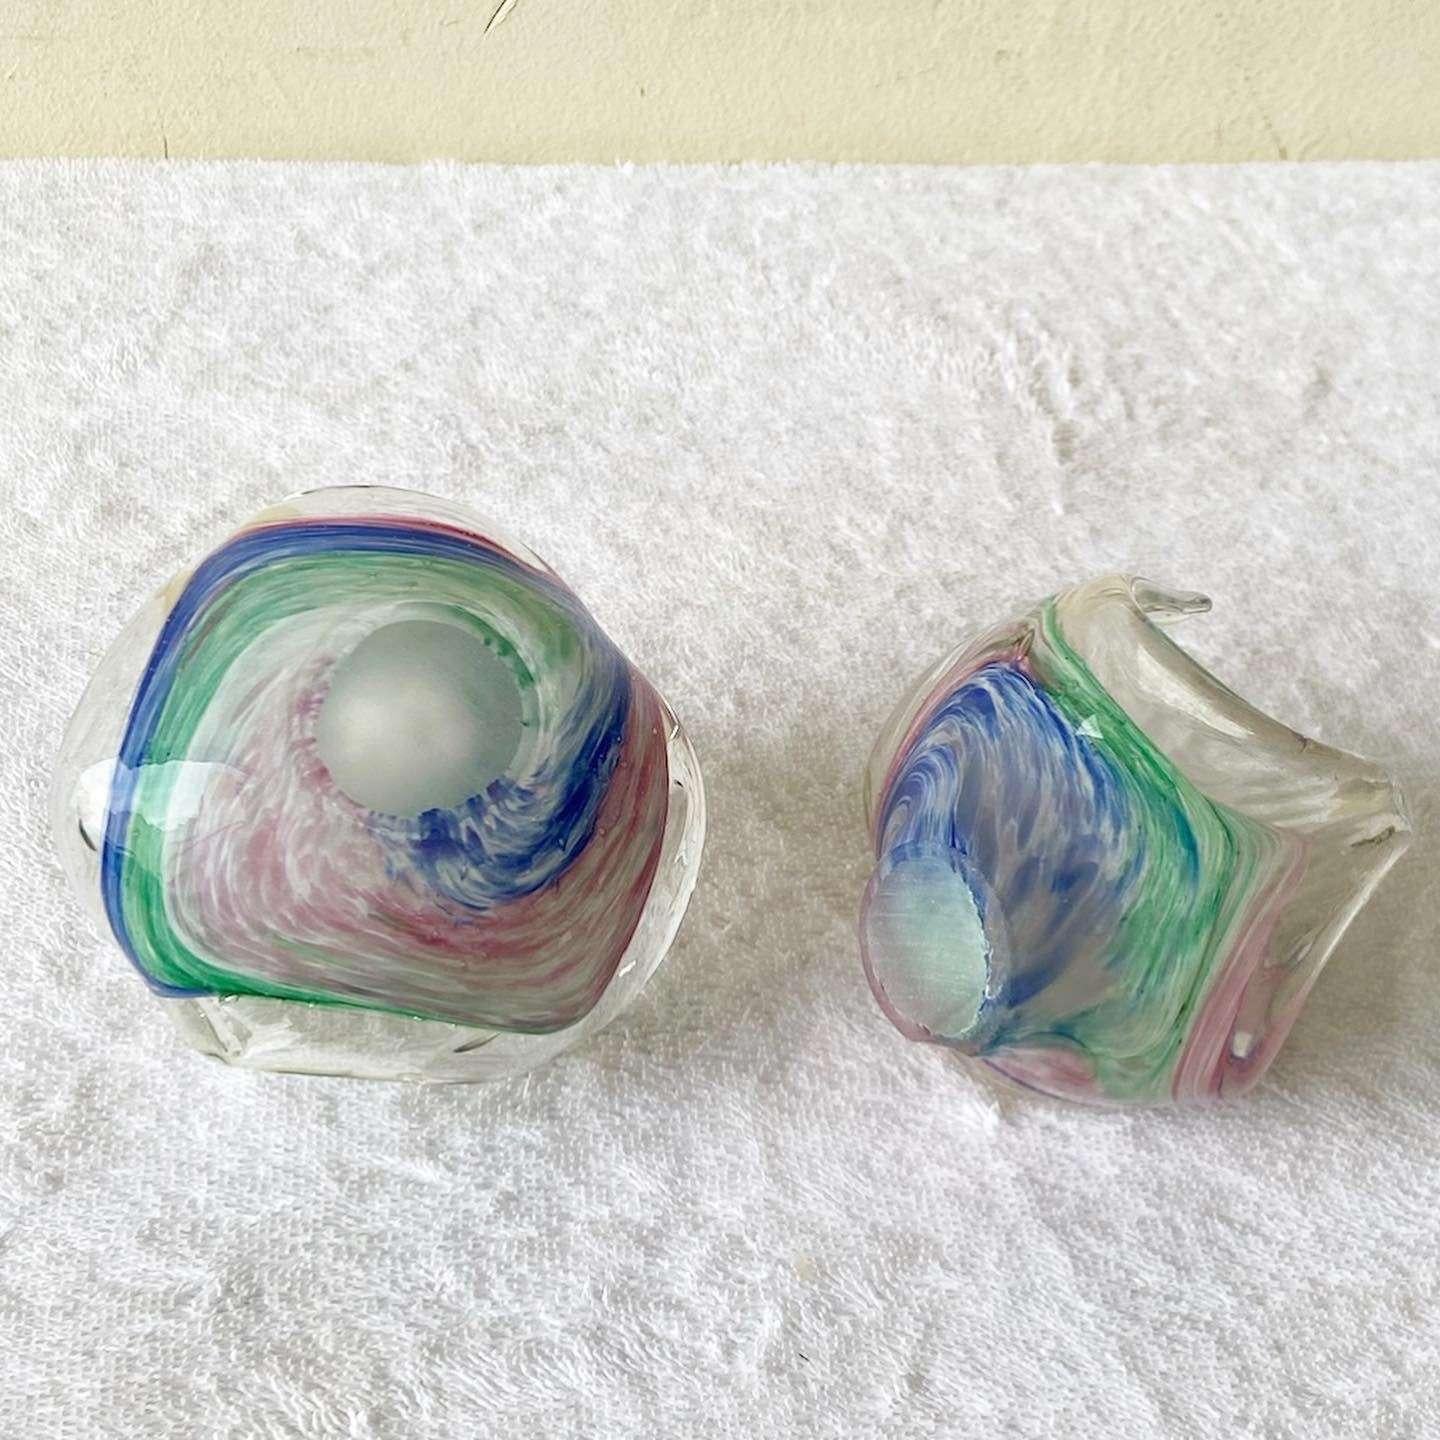 Postmodern Glass Swan Decorative Candy Dishes - a Pair For Sale 2